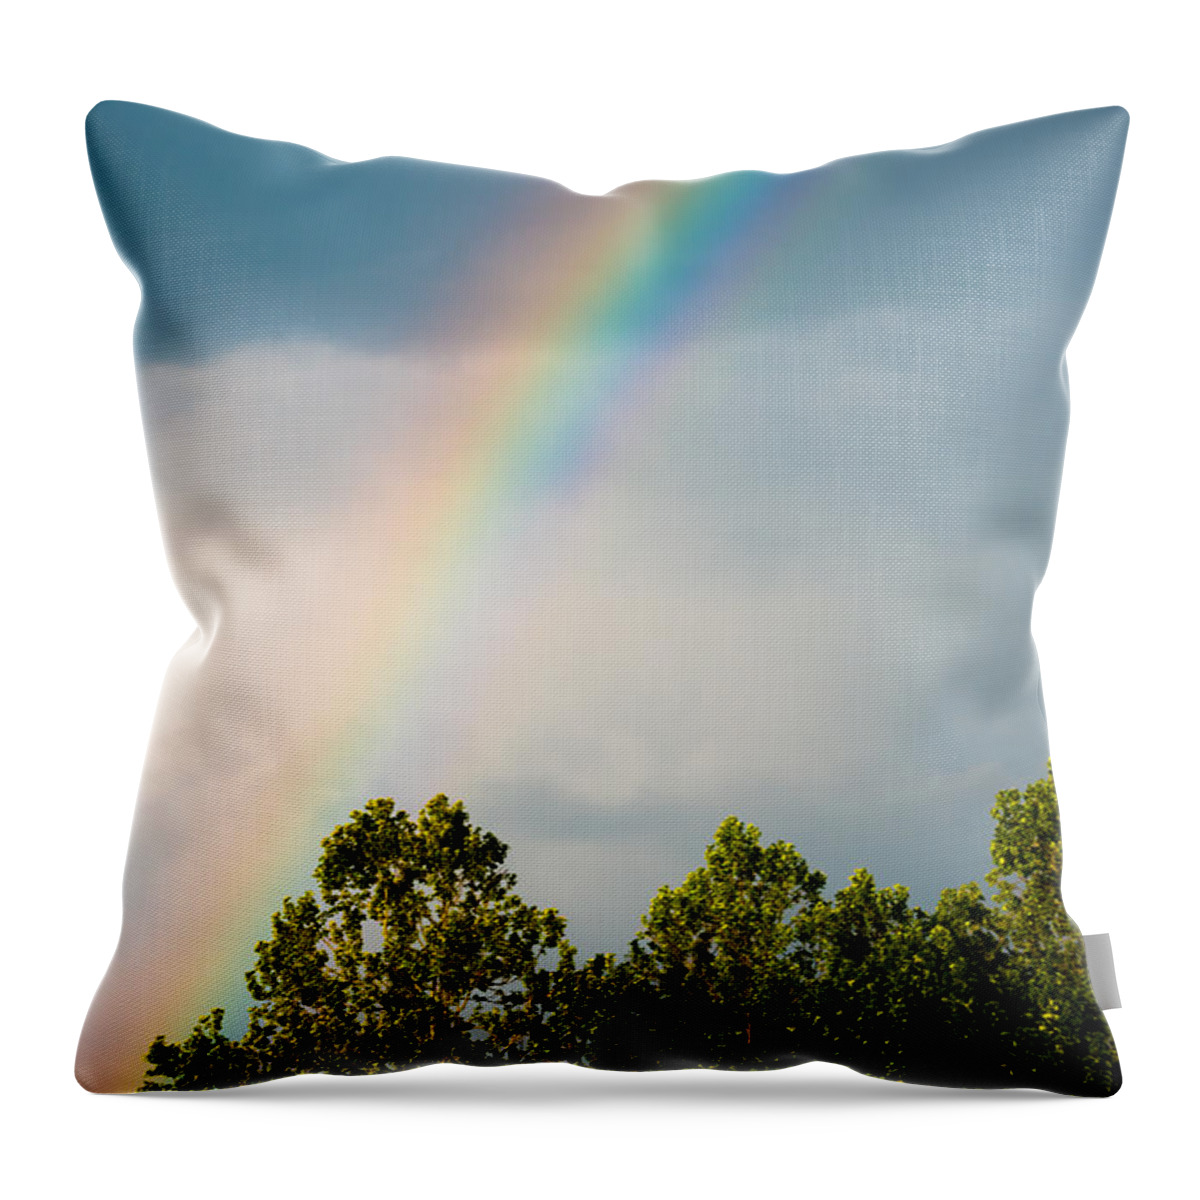 Rainbow Throw Pillow featuring the photograph Rainbow by Holden The Moment